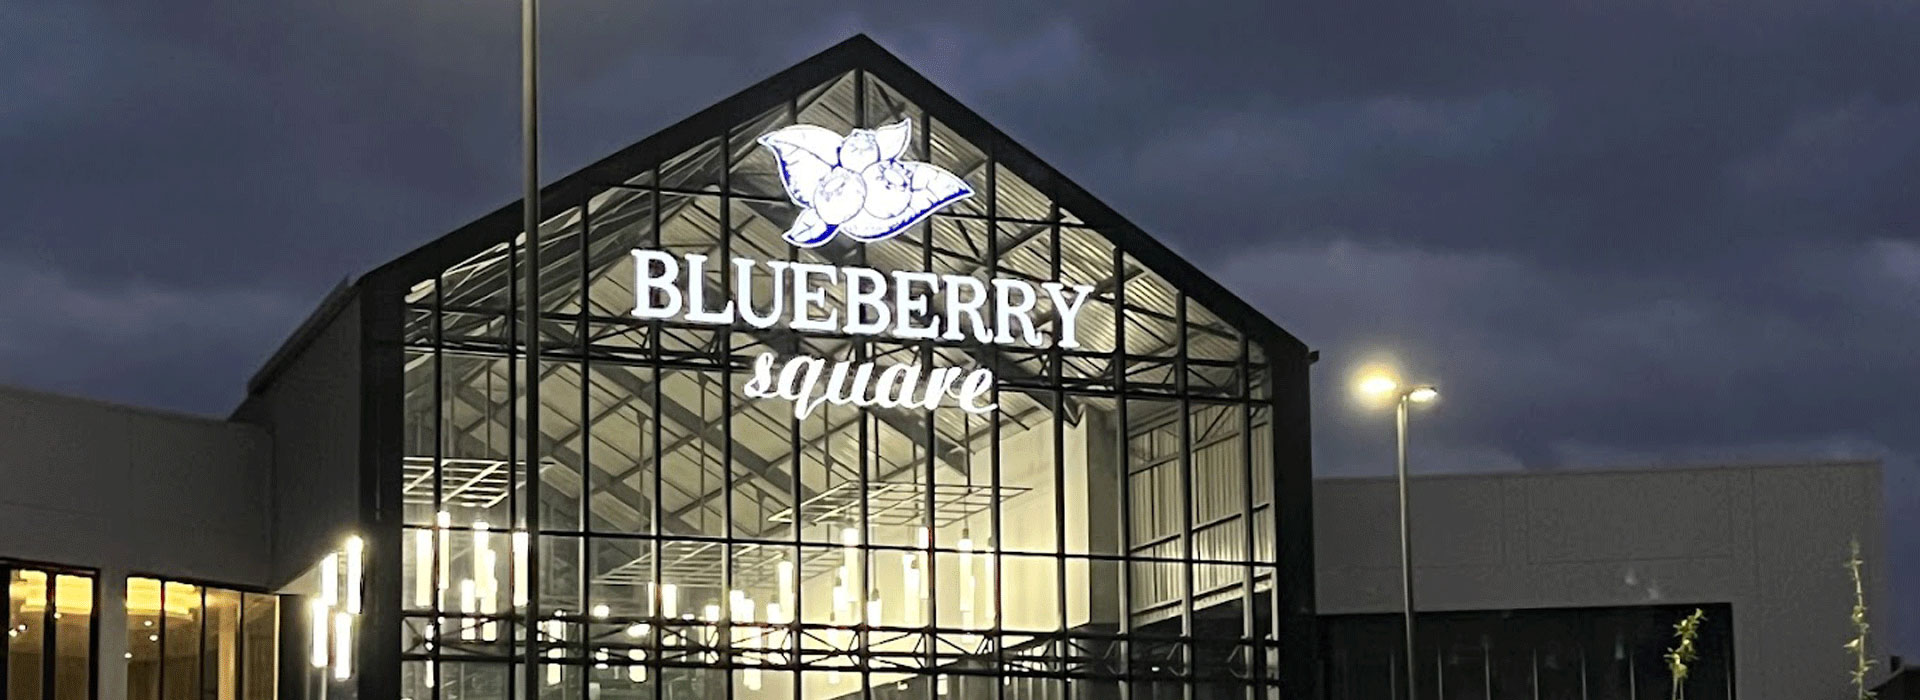 Italtile Commercial Enhances The Elevated Aesthetic Of New Blueberry Square